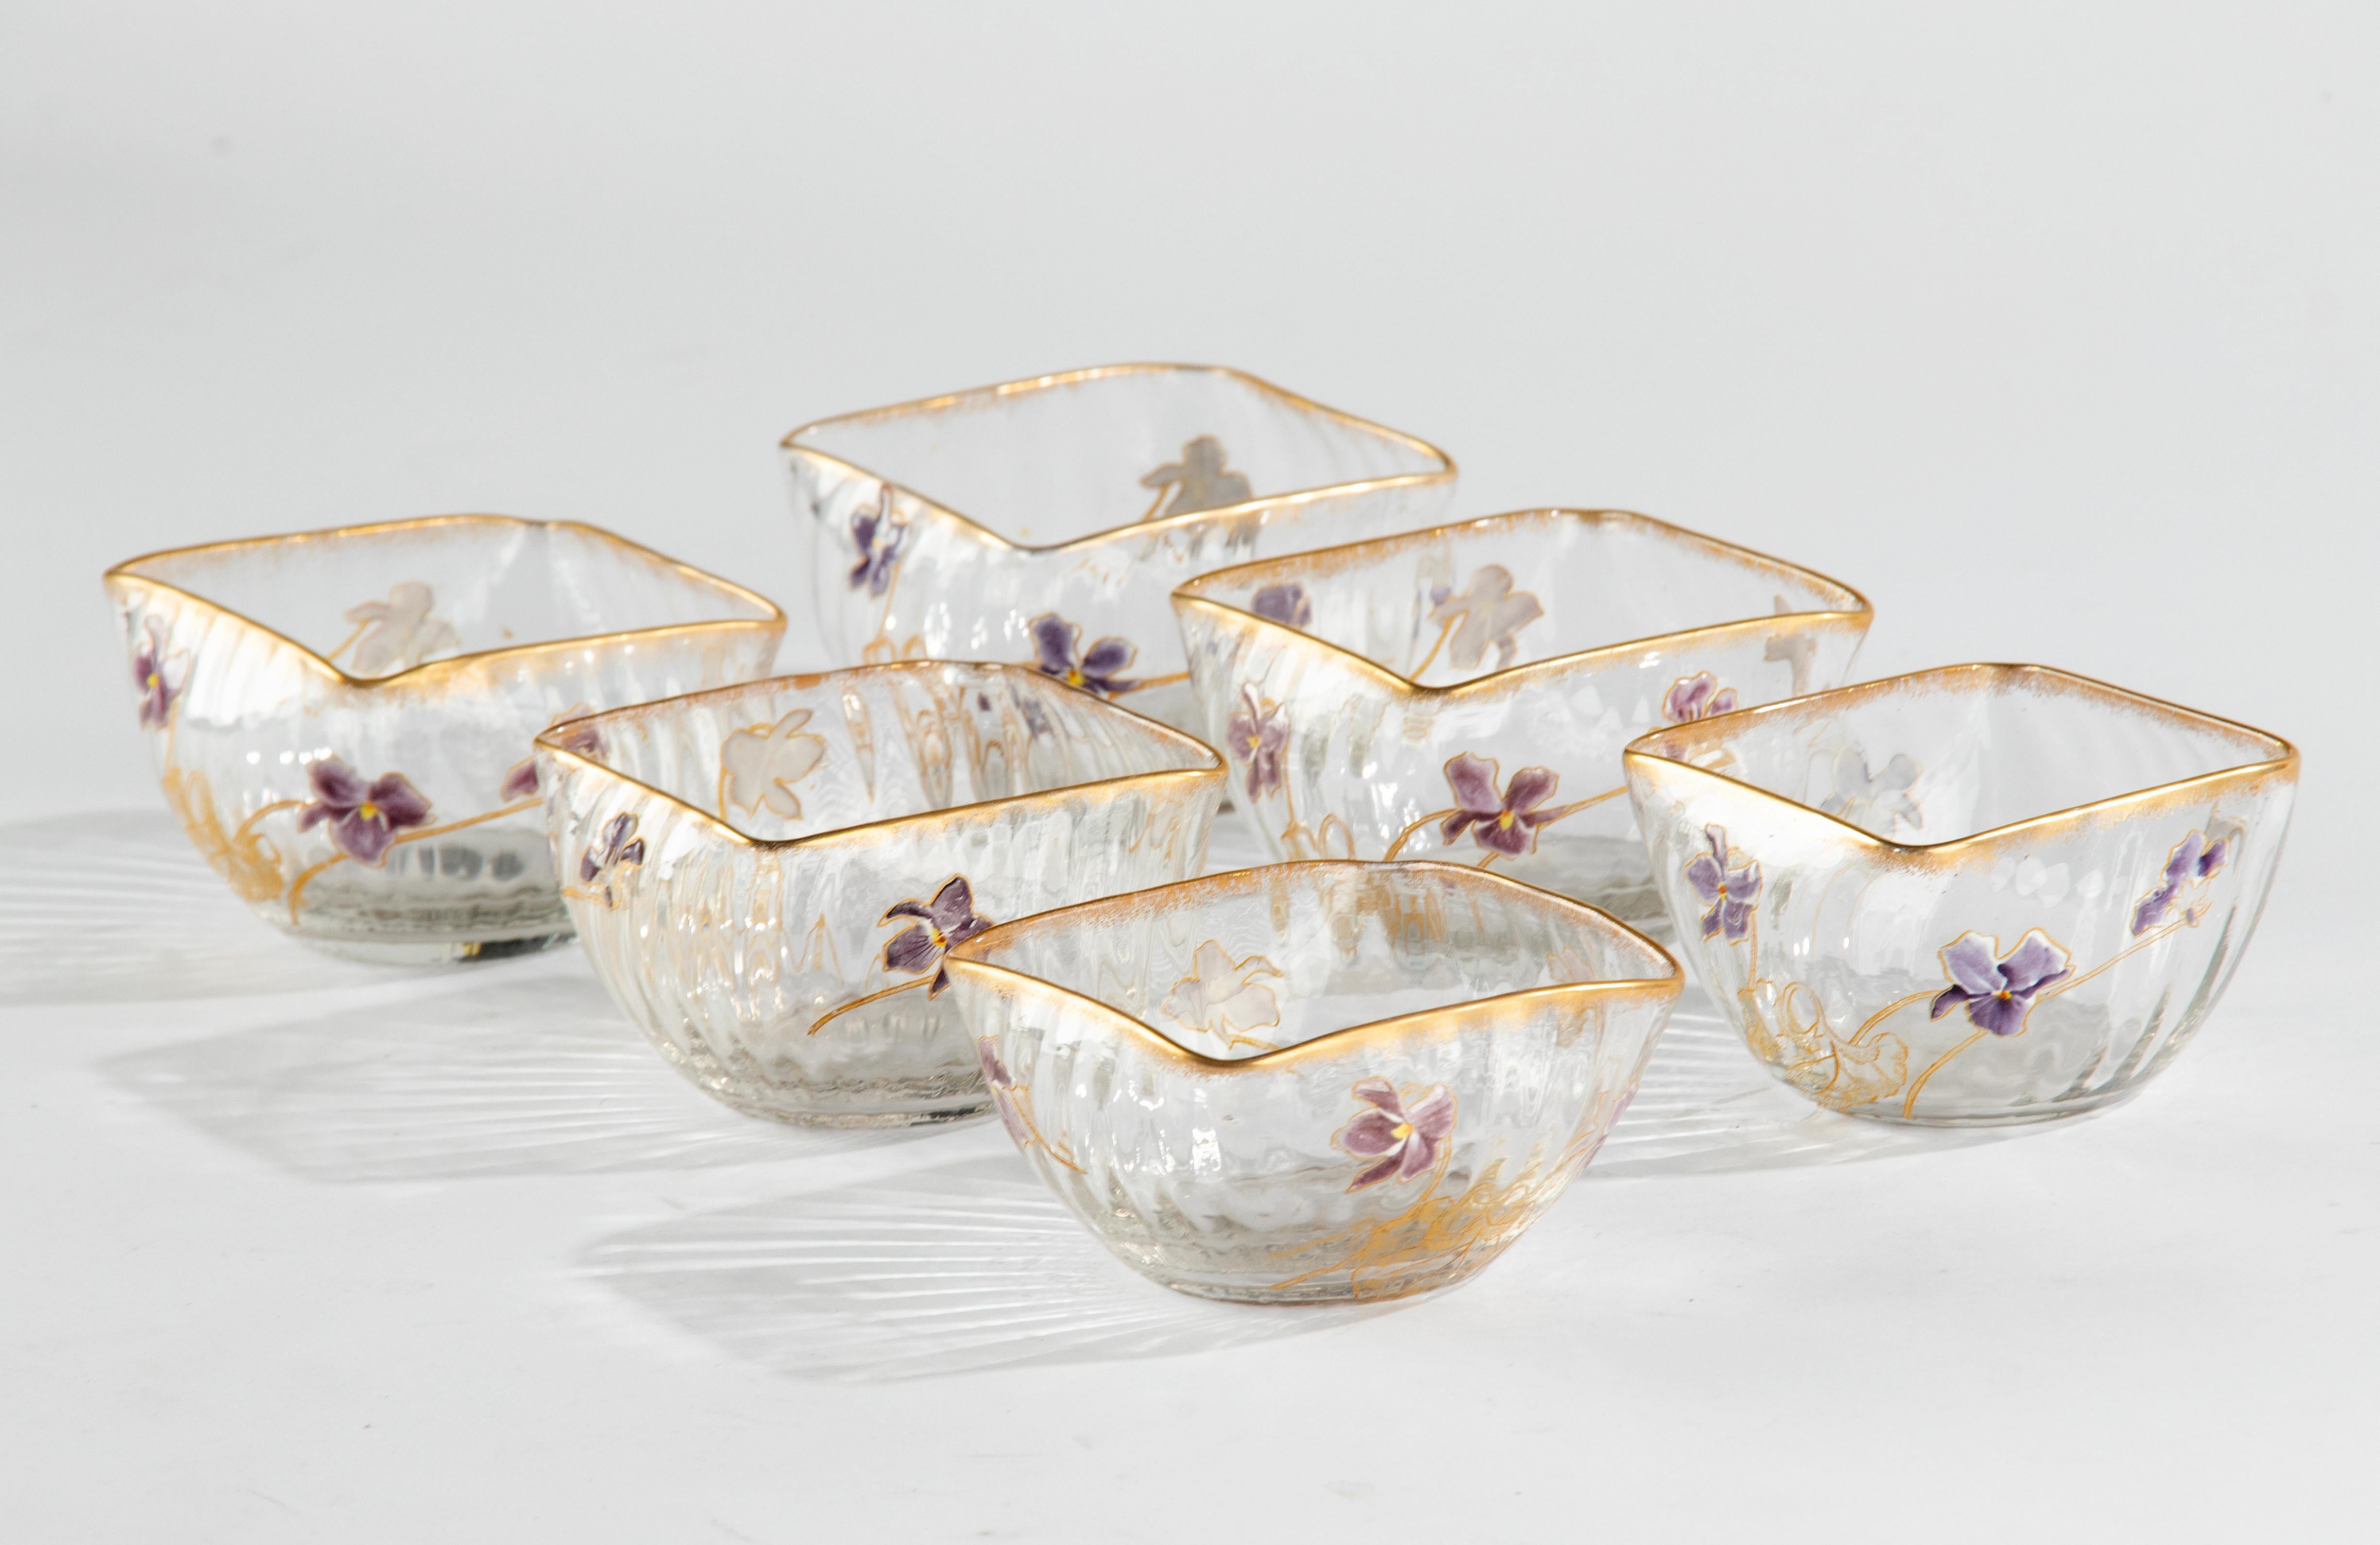 Set of 6 Crystal Art Nouveau Bowls Hand Painted with Flowers Attr. to Daum Nancy For Sale 2